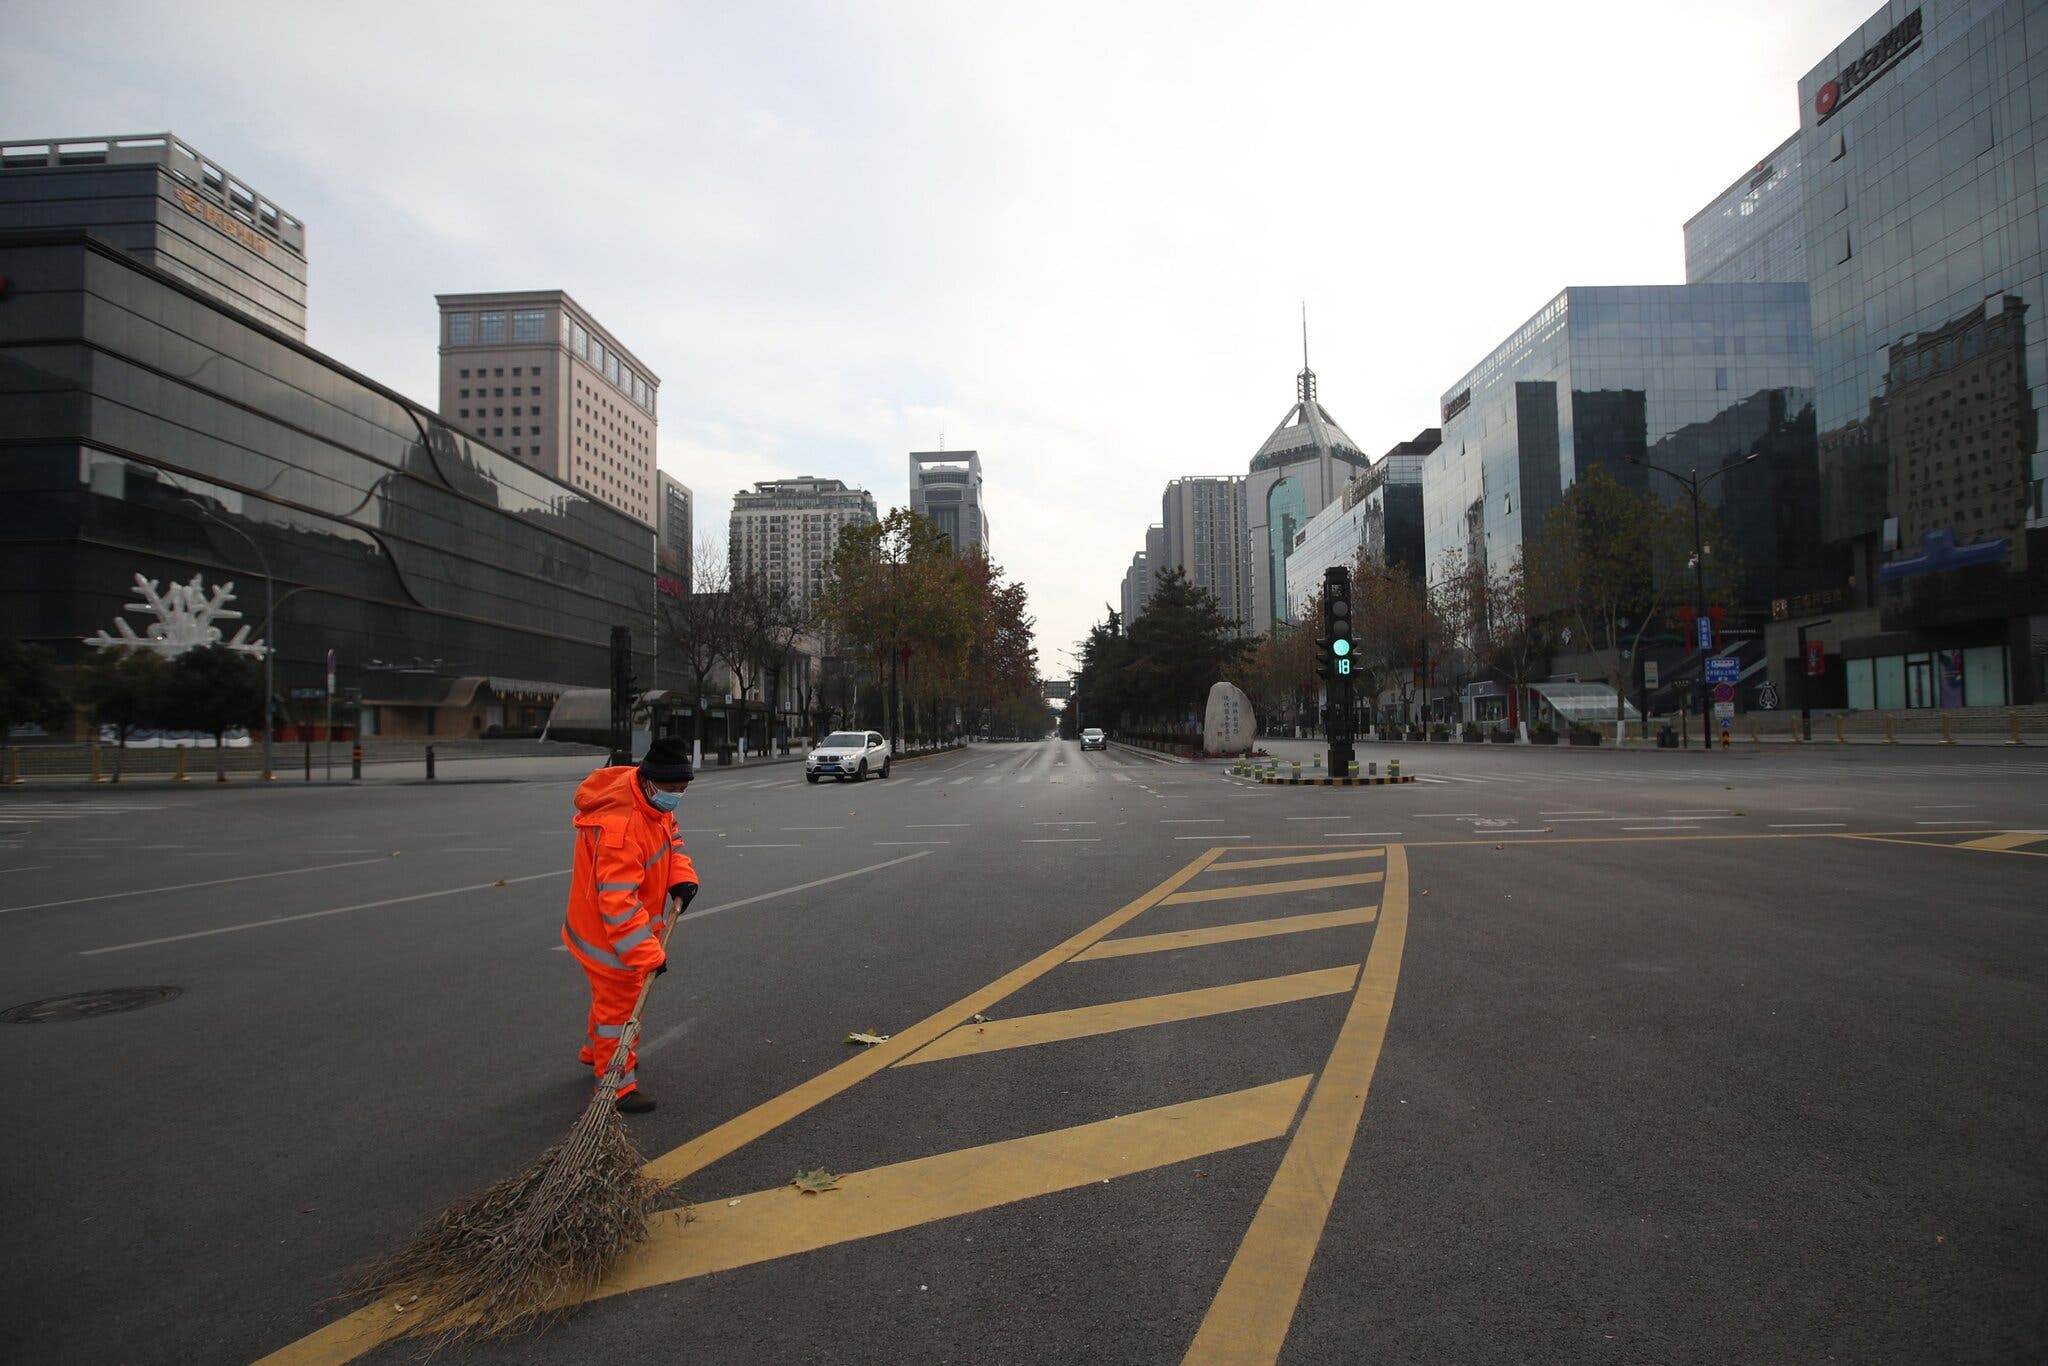 A sanitation worker sweeps a deserted road in Xi'an, in the northern Chinese province of Shaanxi, after the city was locked down in December 2021 due to COVID-19. Photo: Agence France-Presse / Getty Images